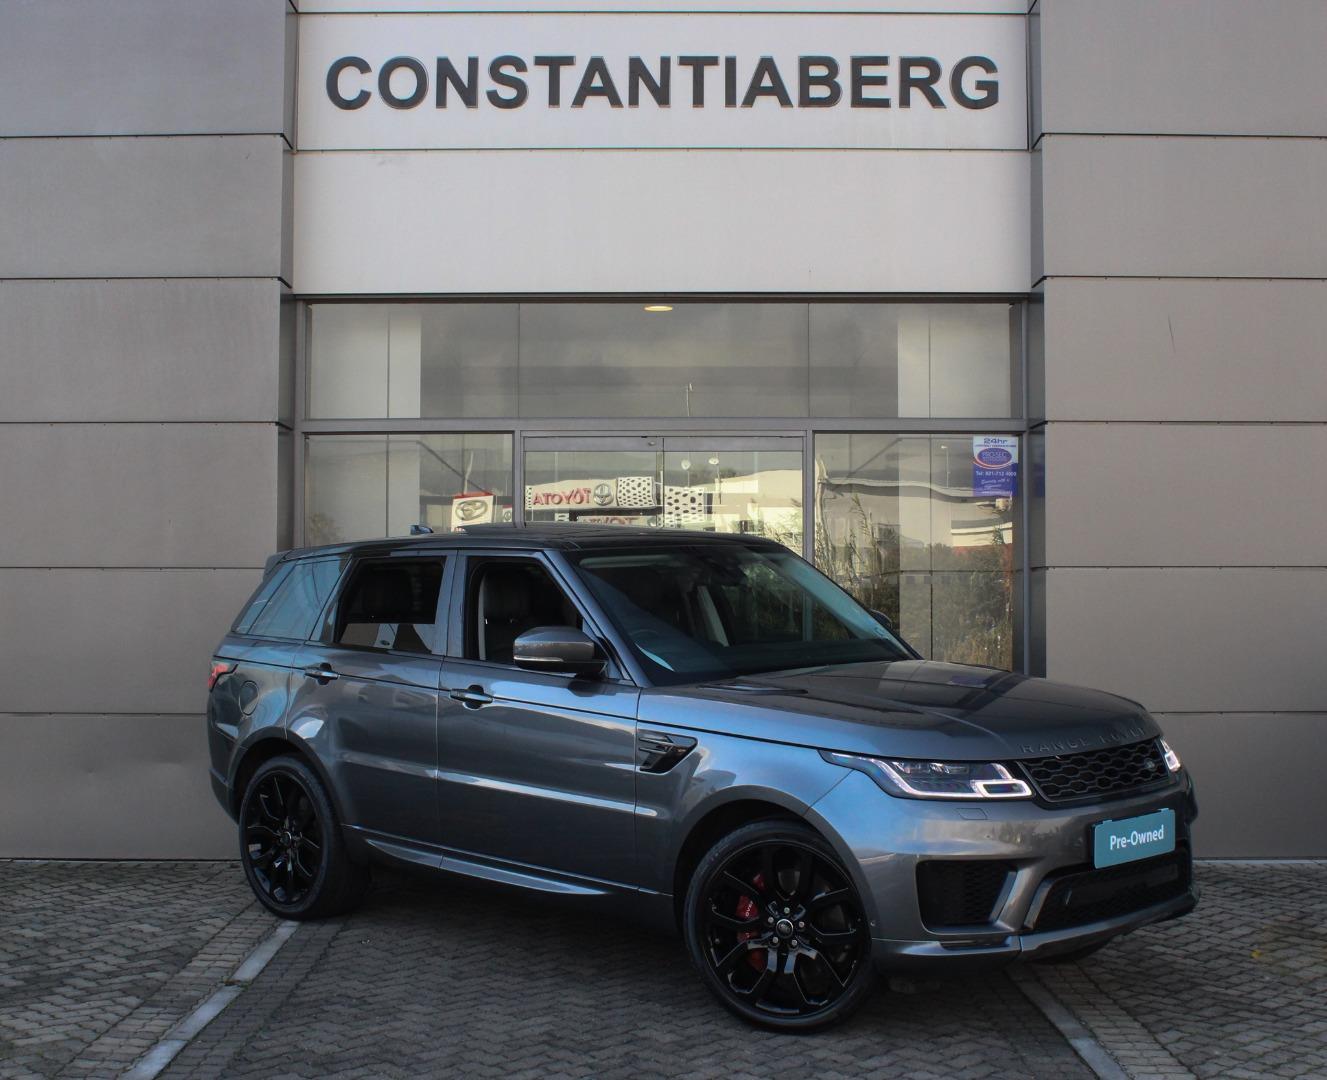 2019 Land Rover Range Rover Sport  for sale - 633665